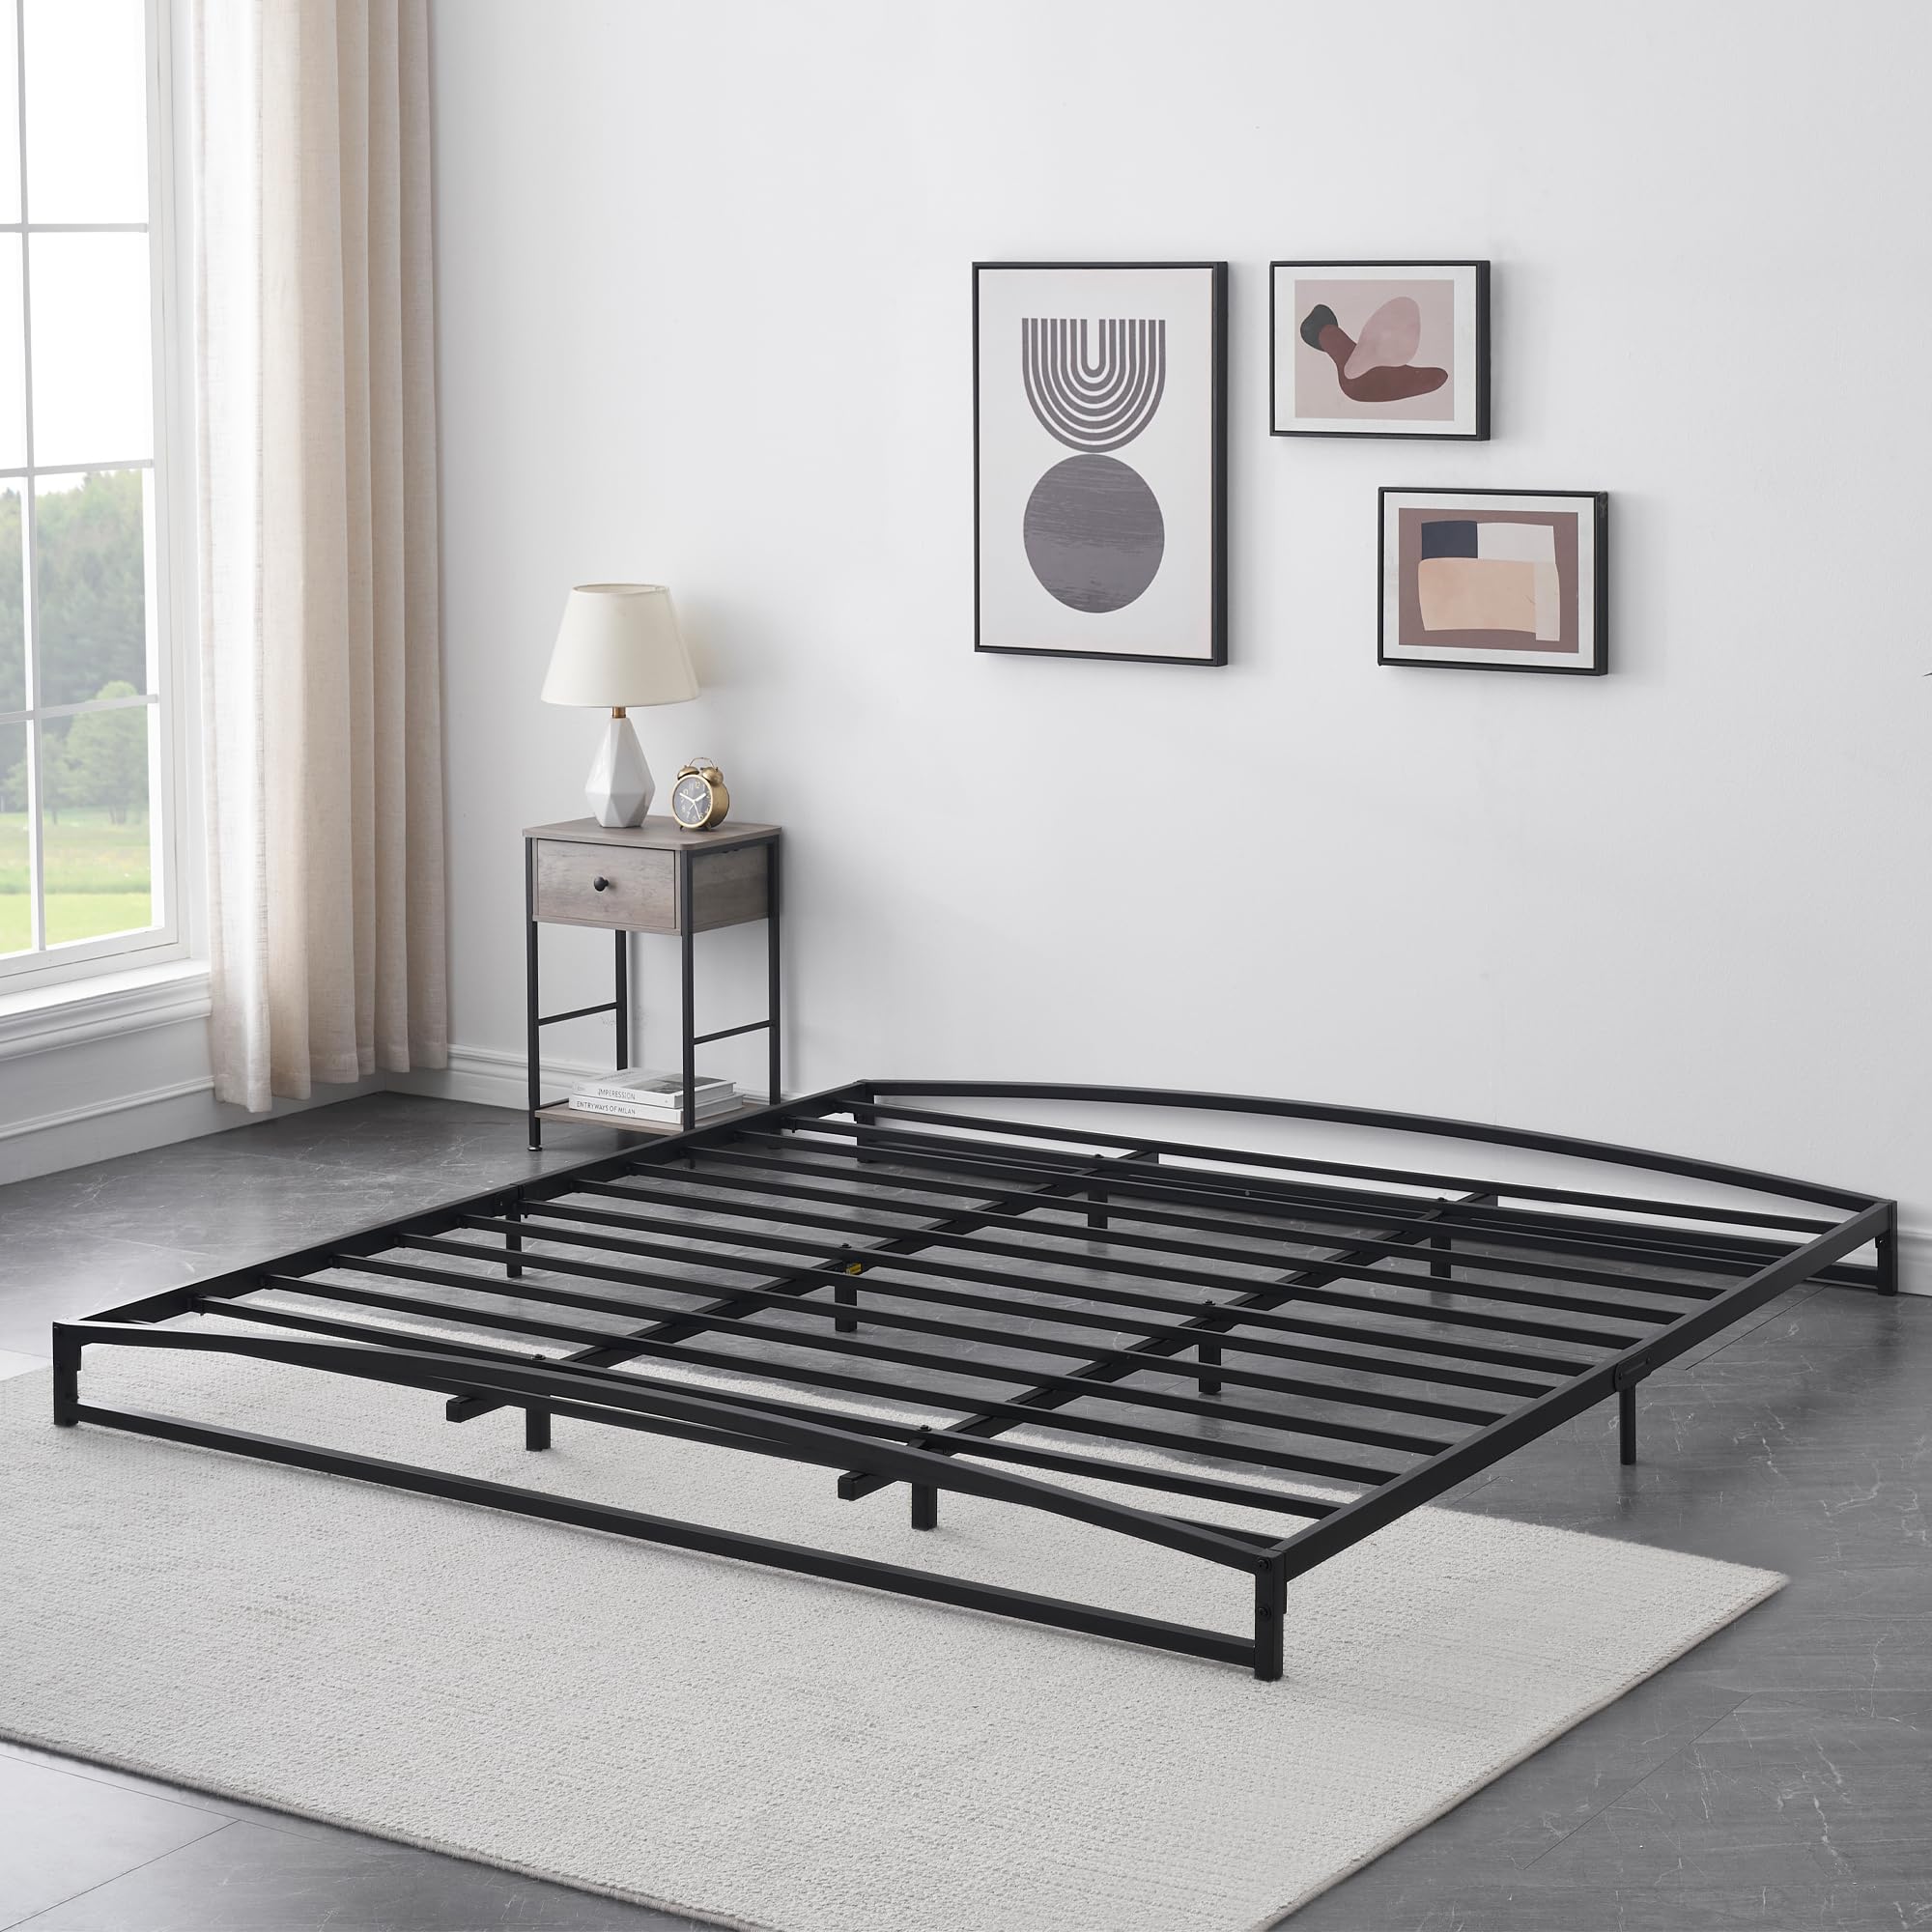 IDEALHOUSE King Bed Frame Low Profile, 6 Inches Black Metal King Size Platform Bed Frame, Mattress Foundation, No Box Spring Needed